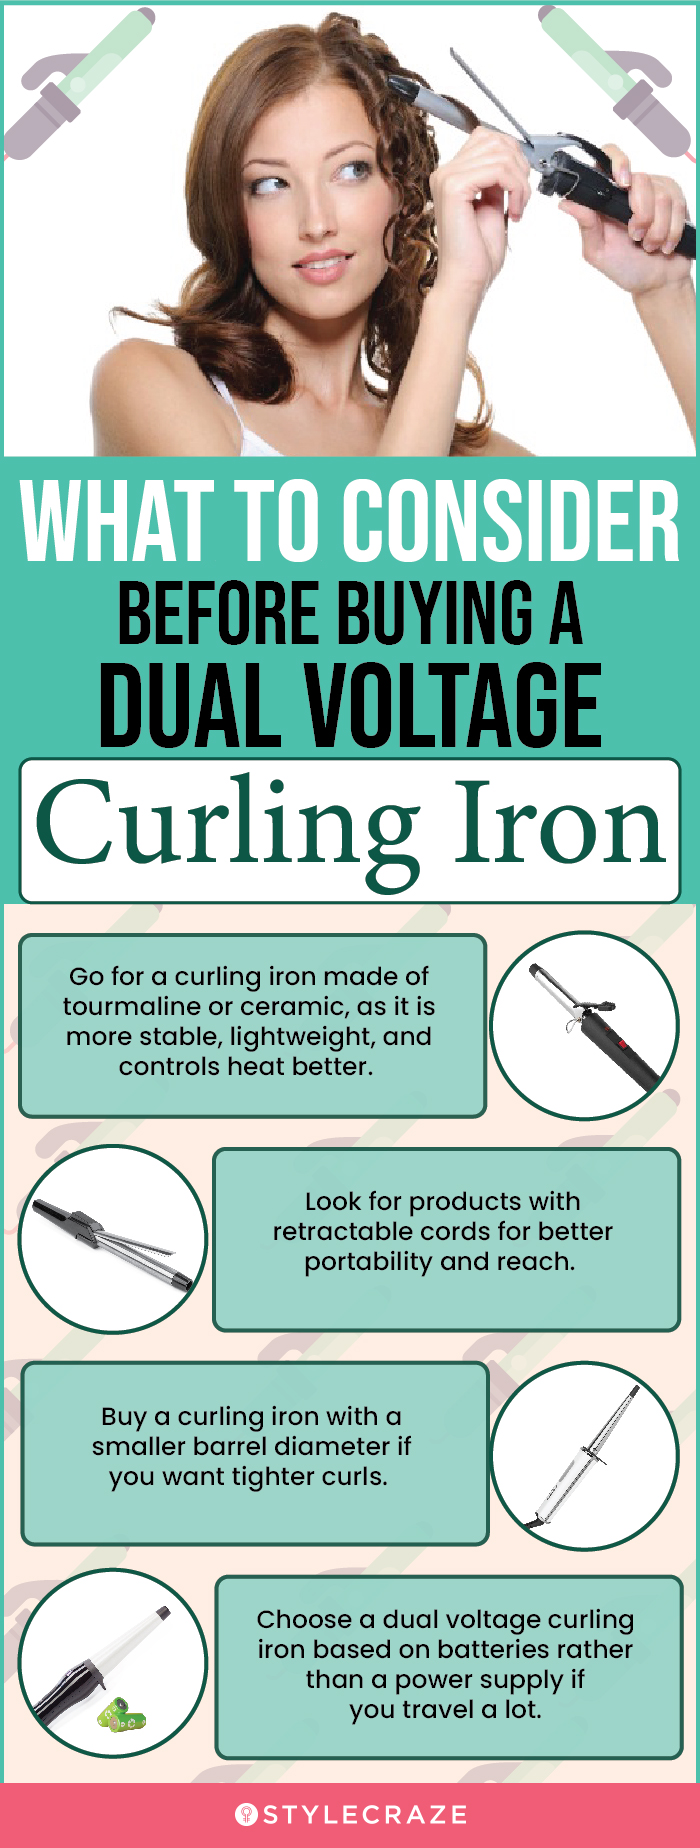 Tips To Consider Before Buying A Dual Voltage Curling Iron (infographic)